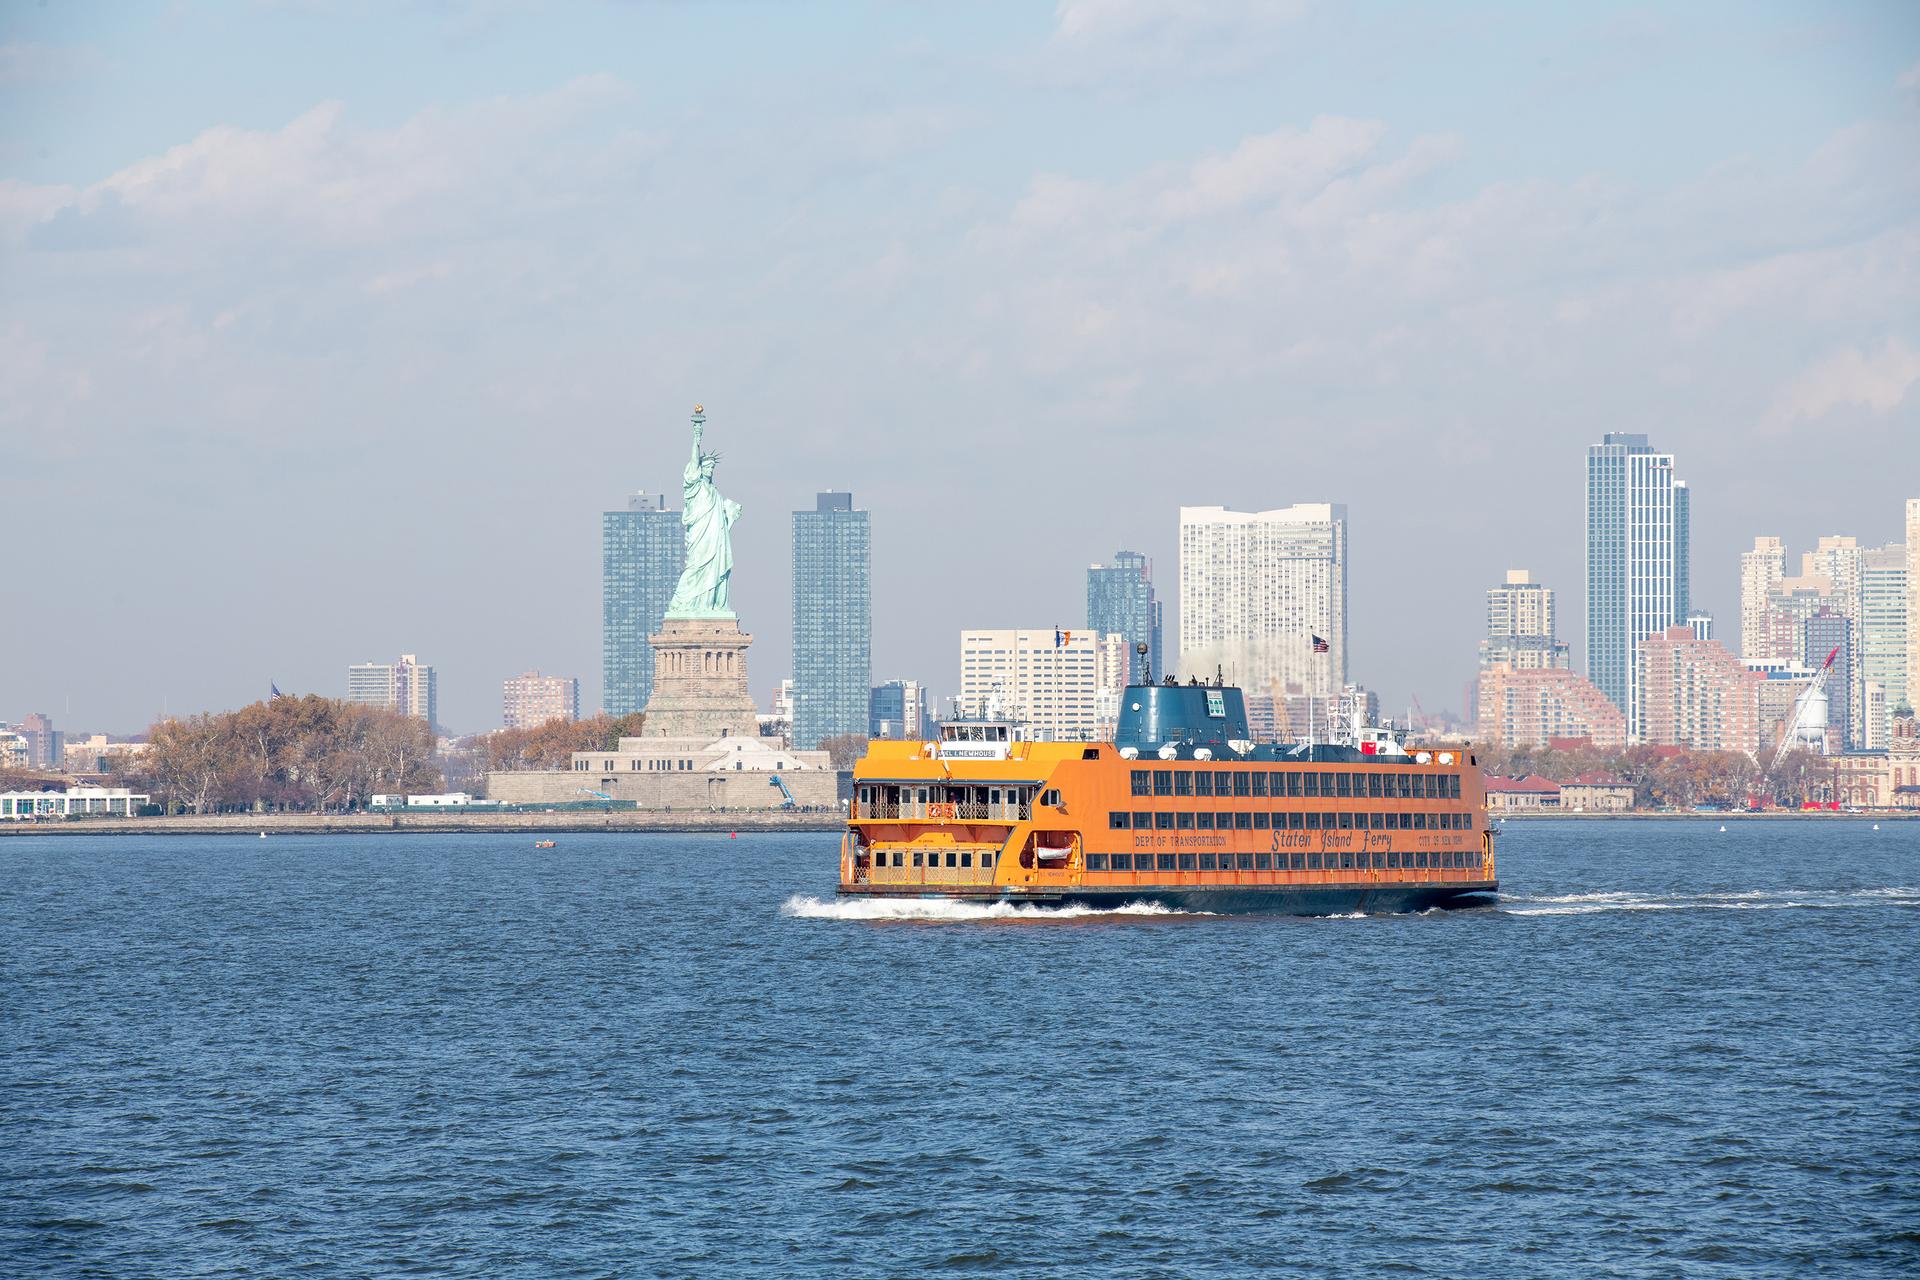 NYC & COMPANY INVITES VISITORS TO STATEN ISLAND LIKE A NEW YORKER